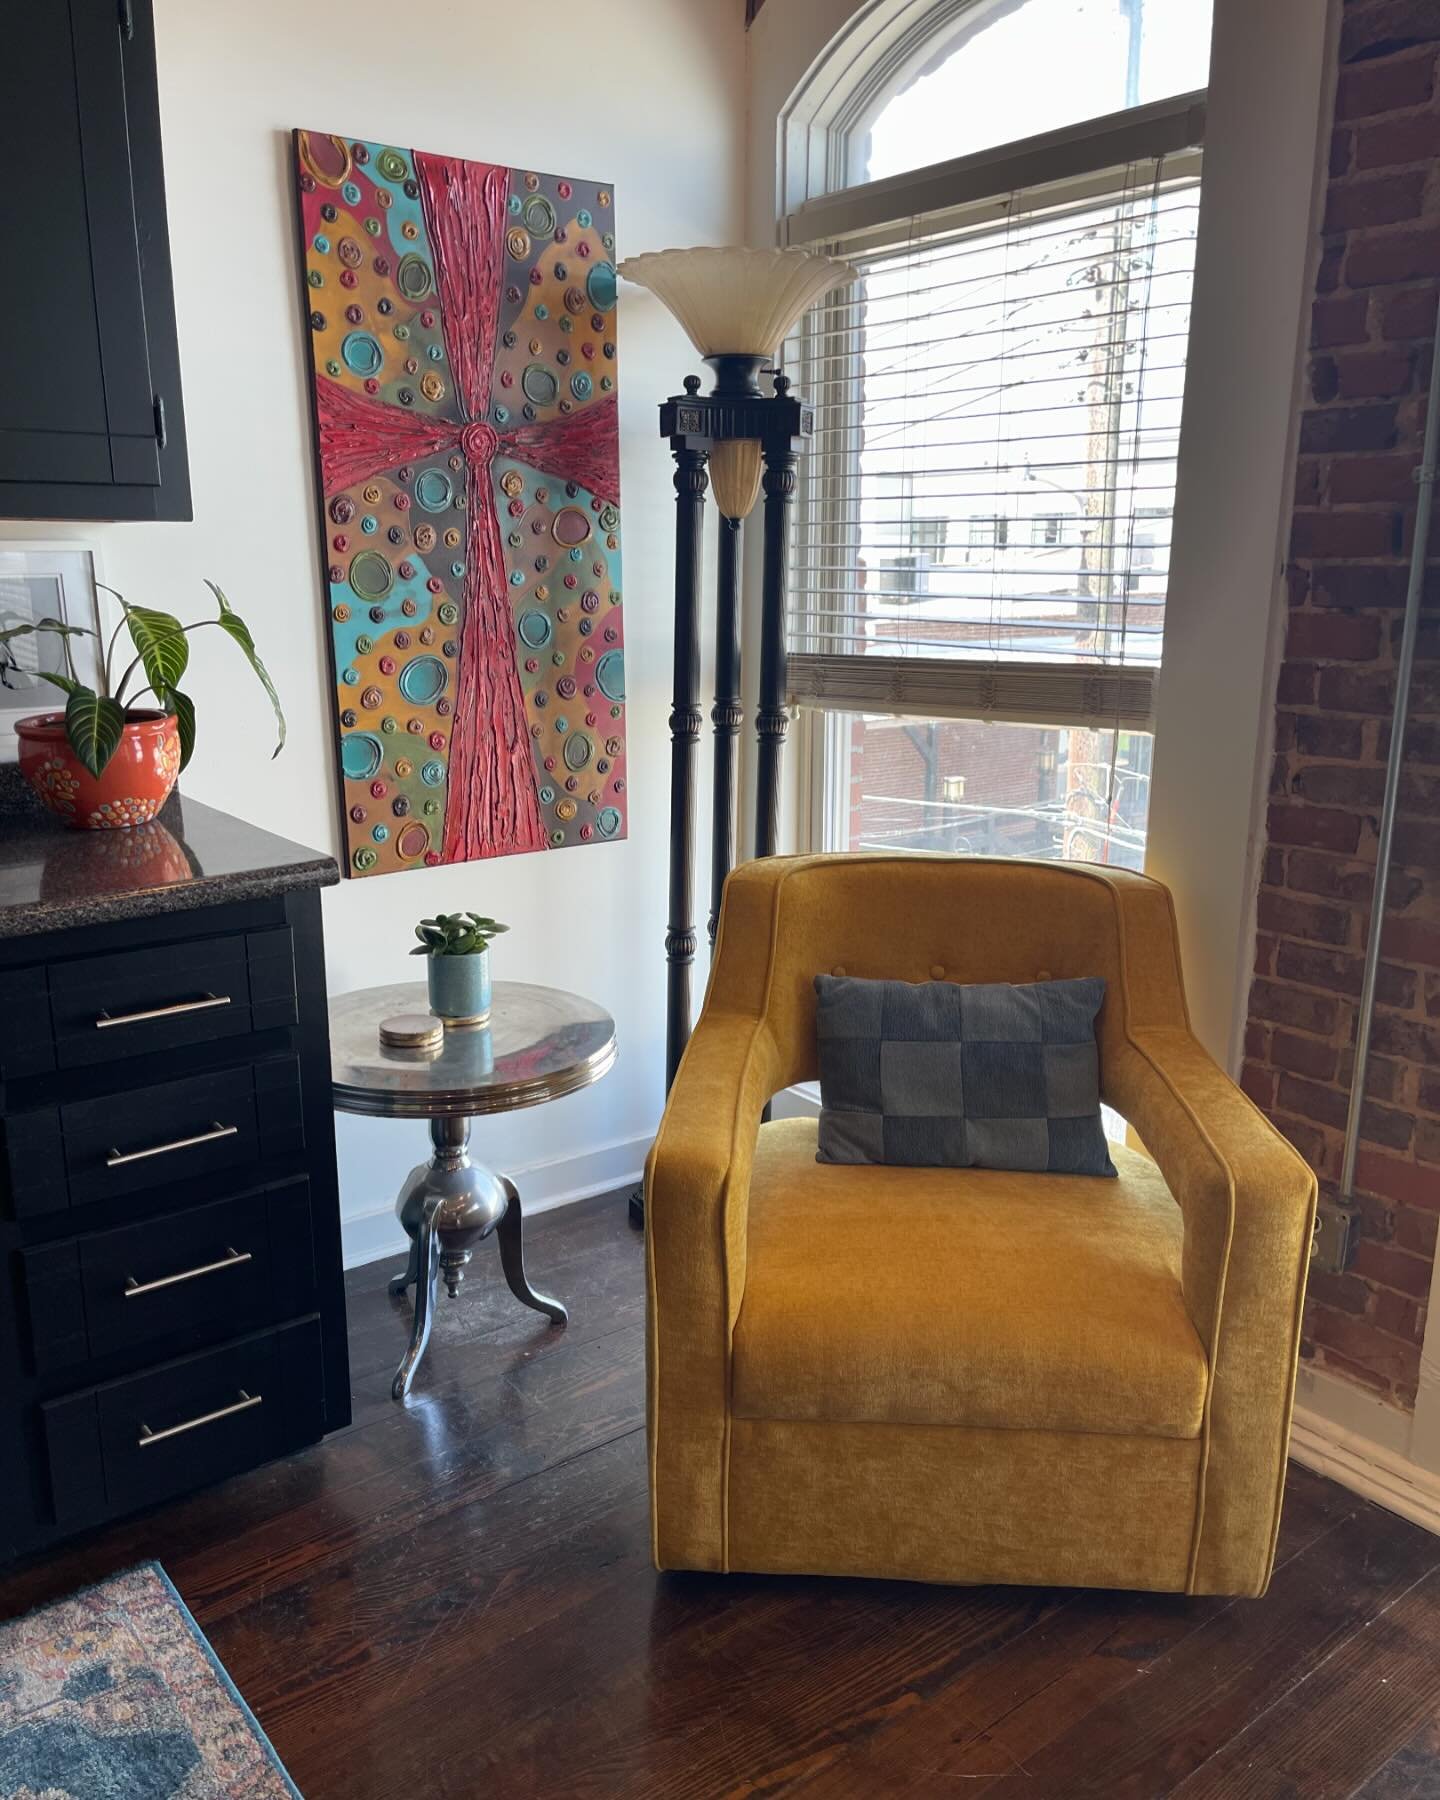 Momprenuer Sanctuary in downtown Jonesboro. 

Do you need a few hours of private &amp; uninterrupted time?? The loft is a great place to focus &amp; enjoy the energy of downtown.